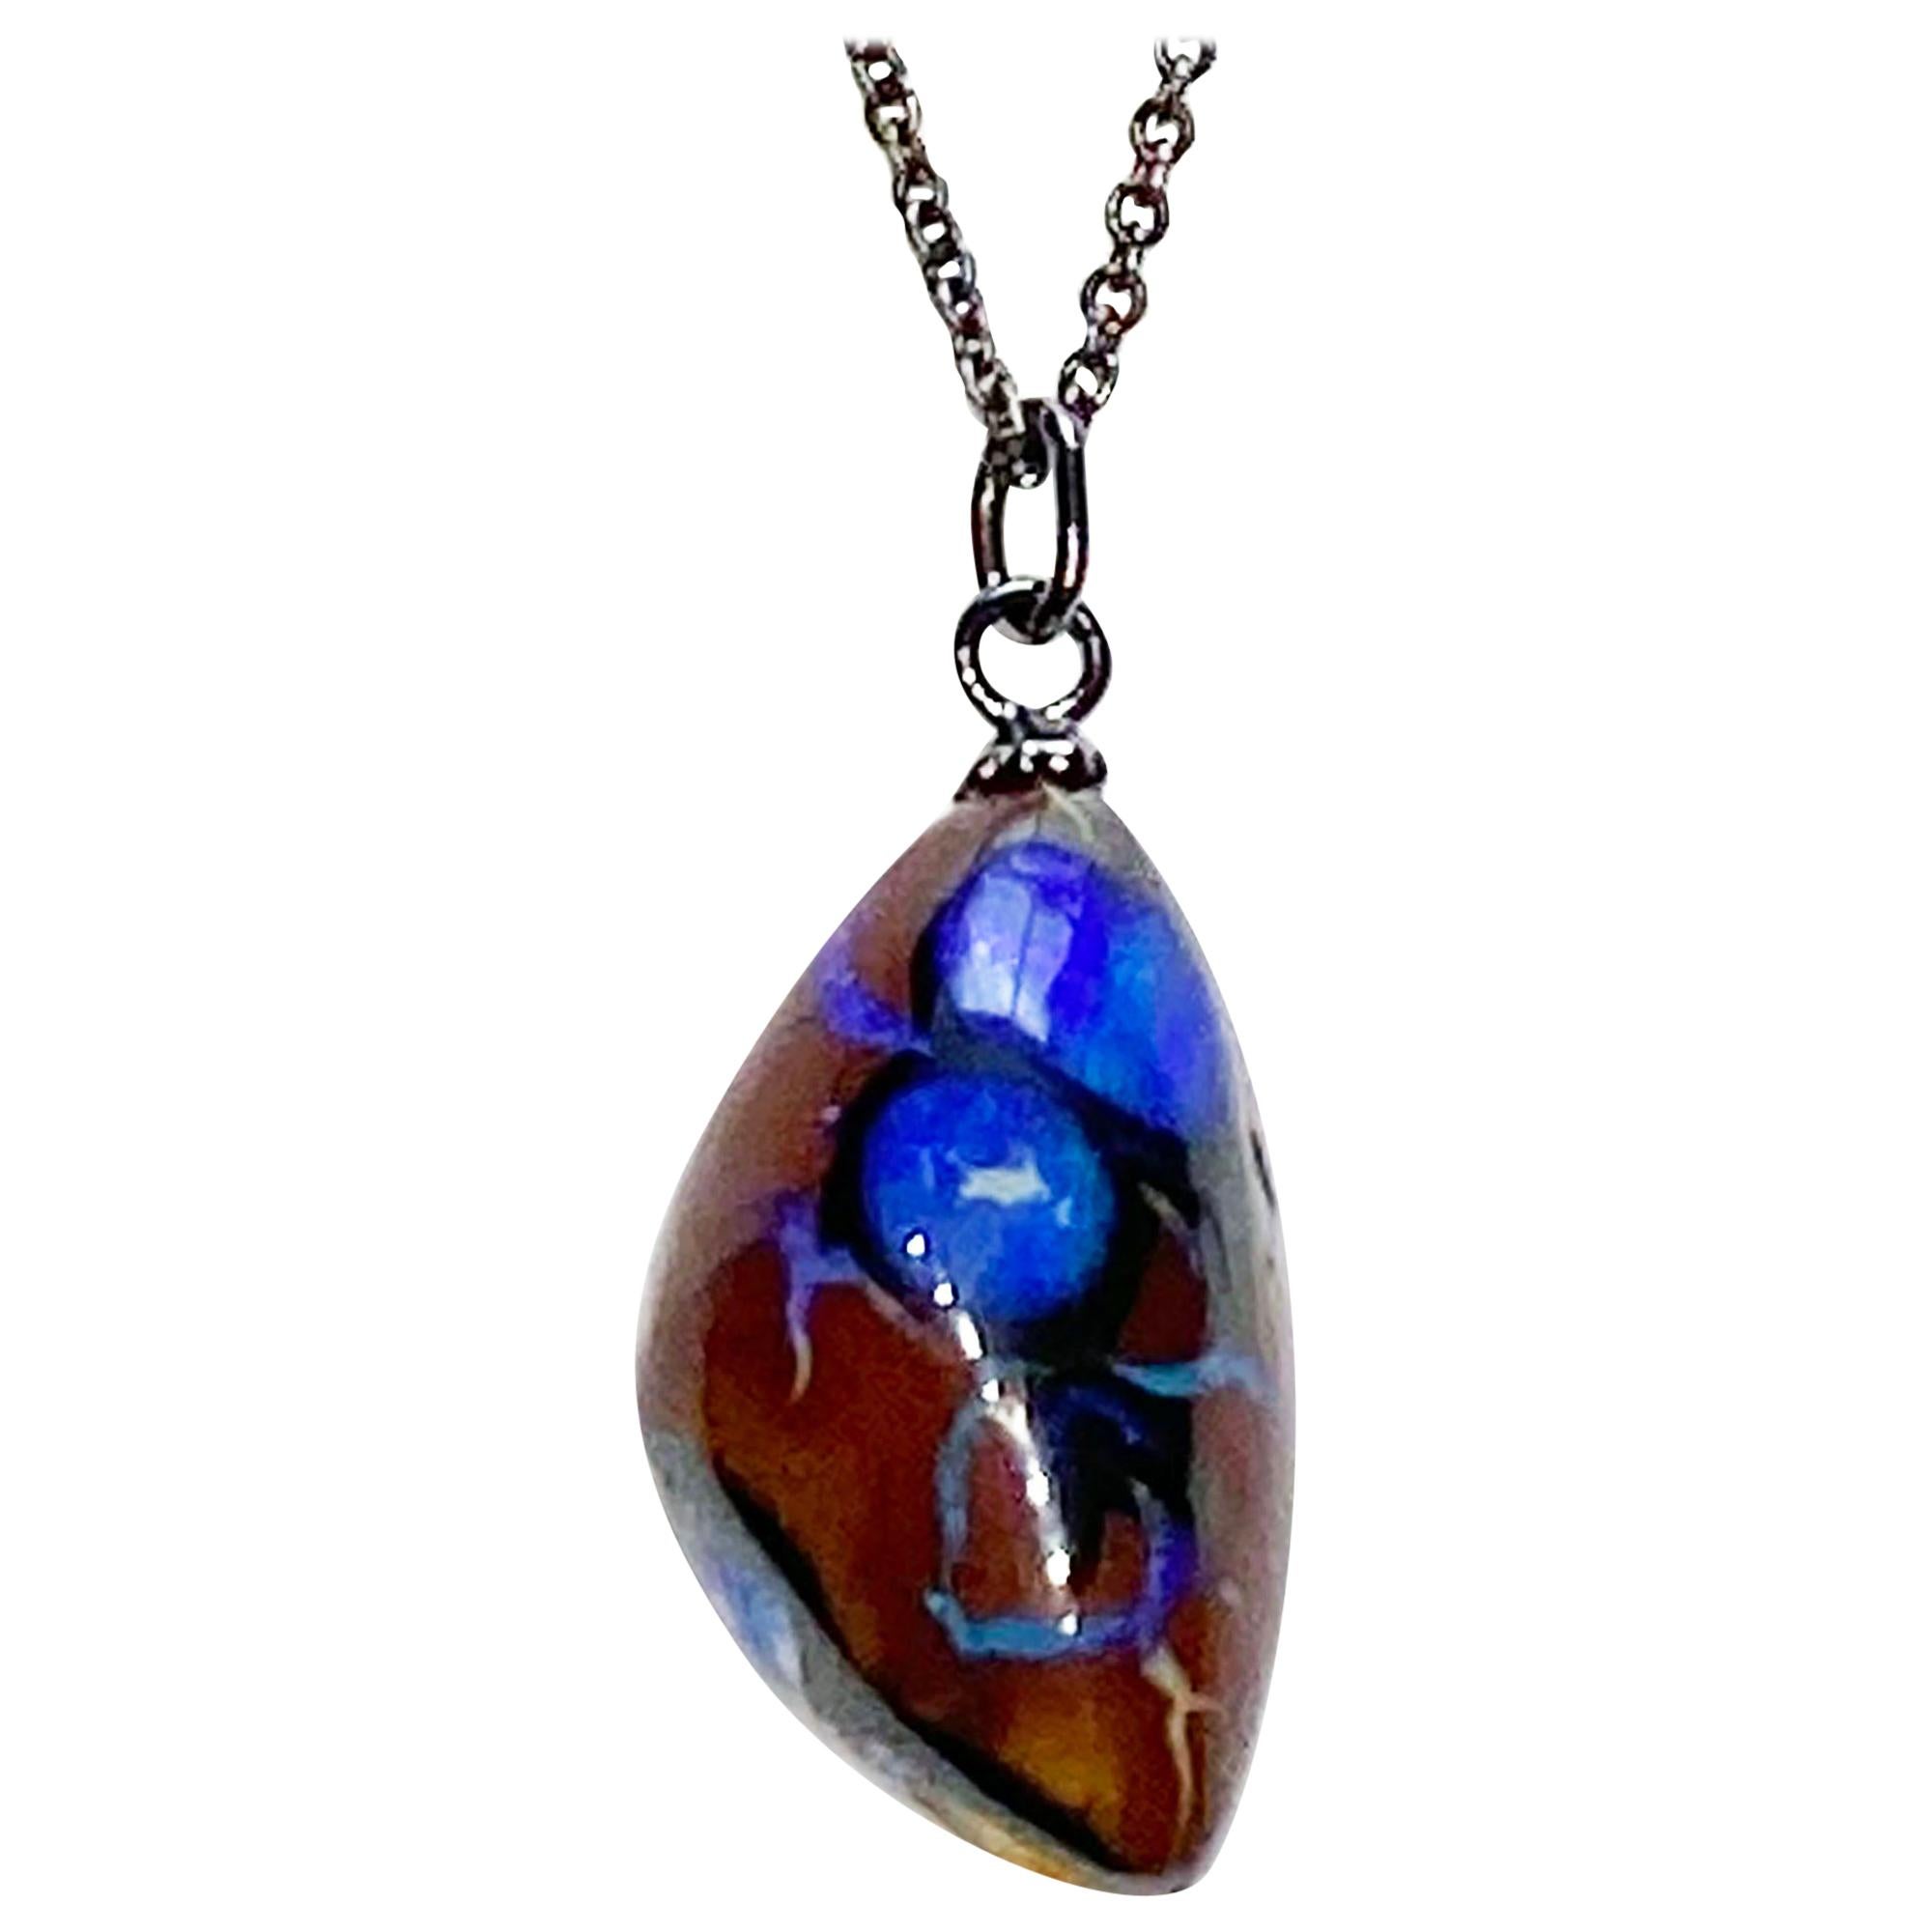 Boulder Opal Pendant on a Blackened Silver Chain